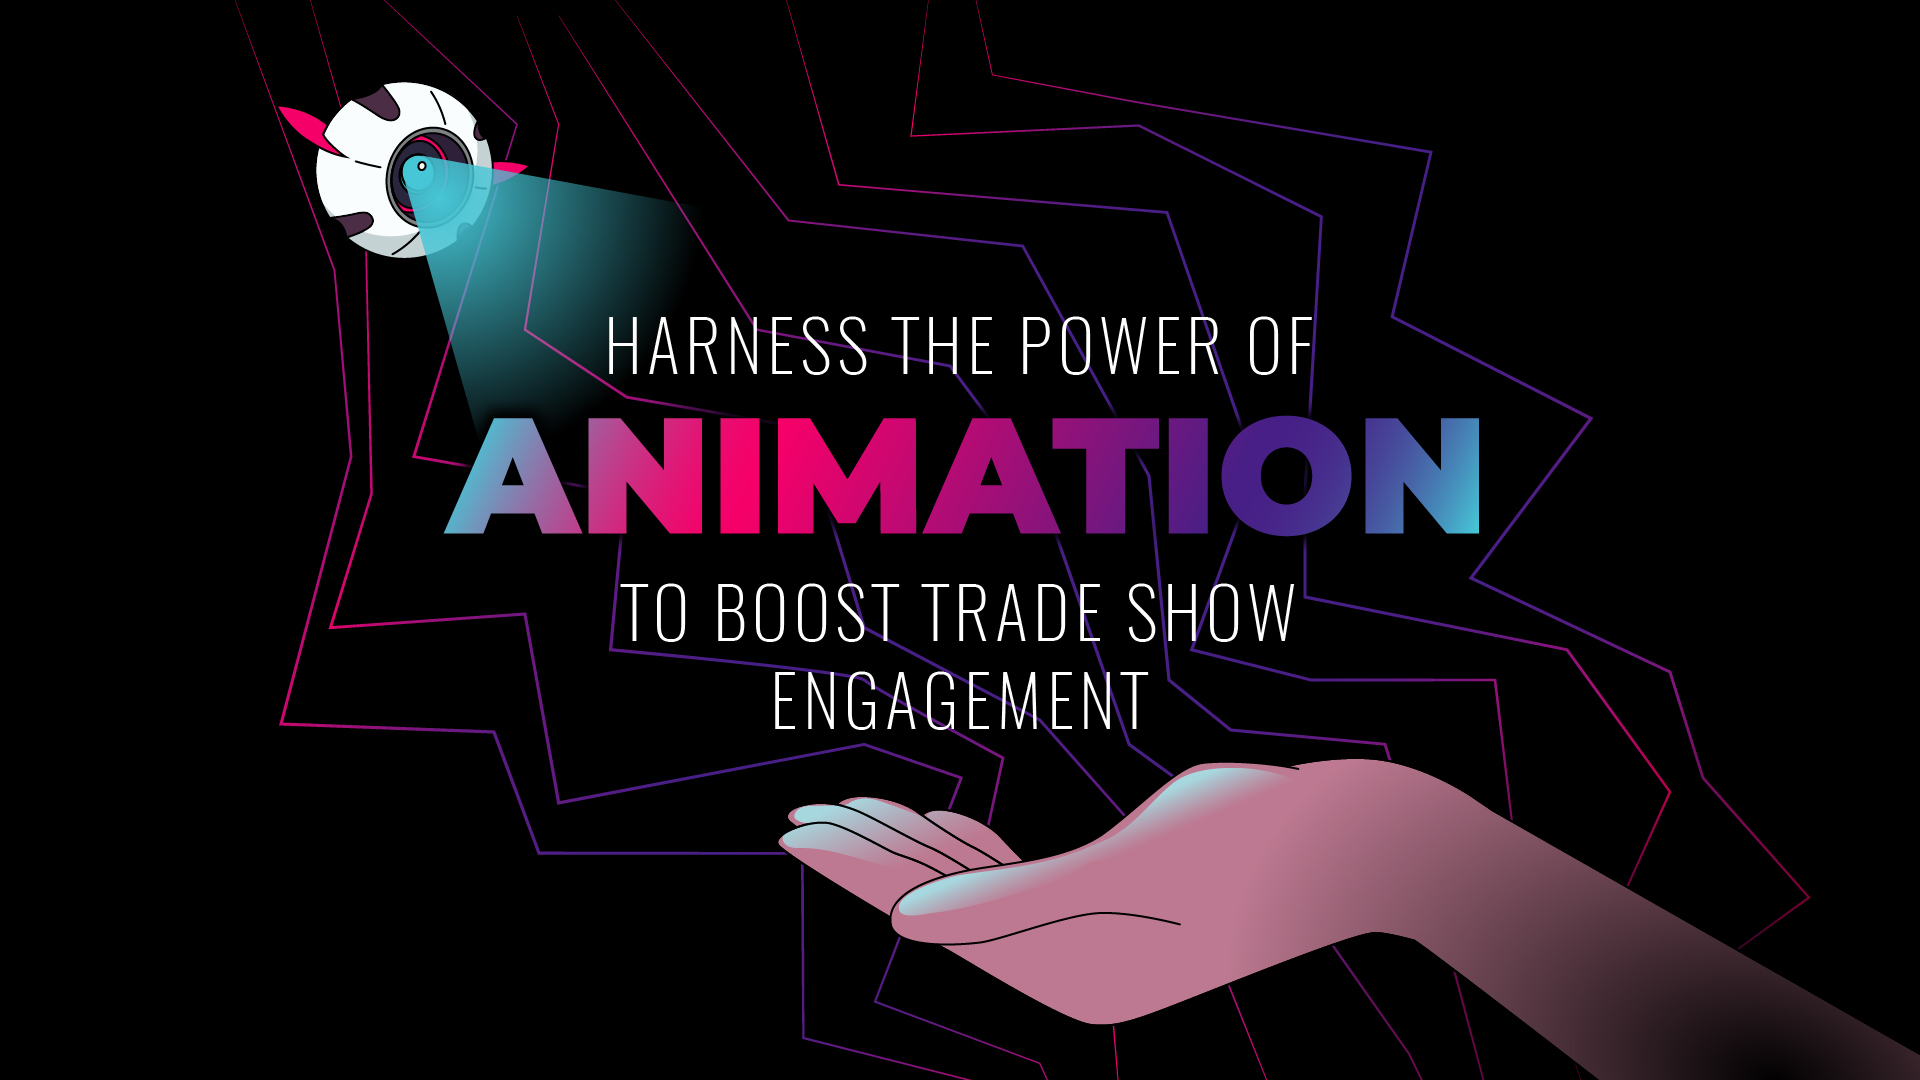 Harness the Power of Animation to Boost Trade Show Engagement and Increase  ROI - Wow-How